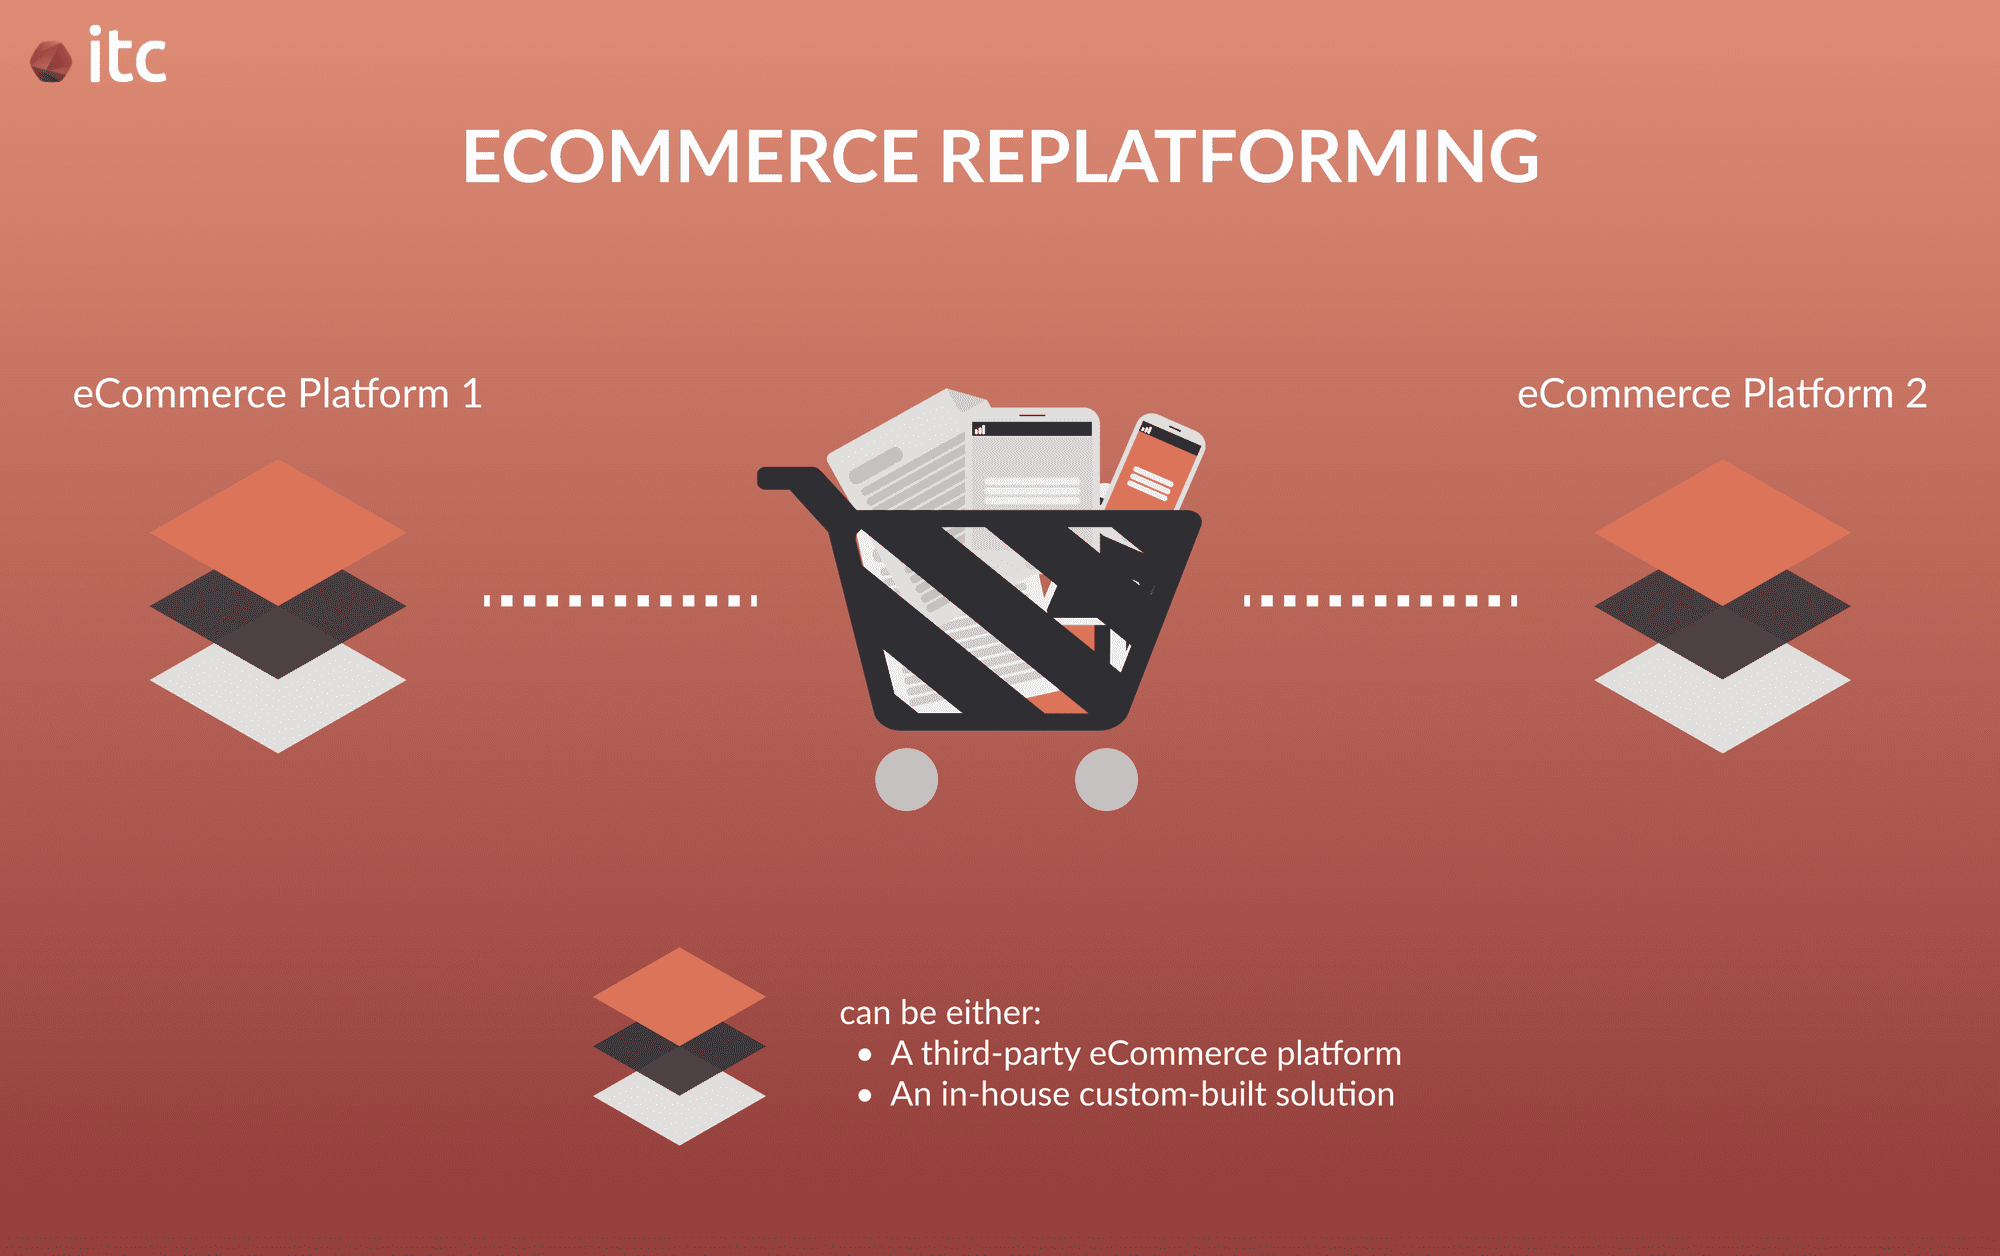 eCommerce replatforming is the process of migrating your online store from 1 eCommerce platform to another, which can be a third-party one or an in-house custom-built solution